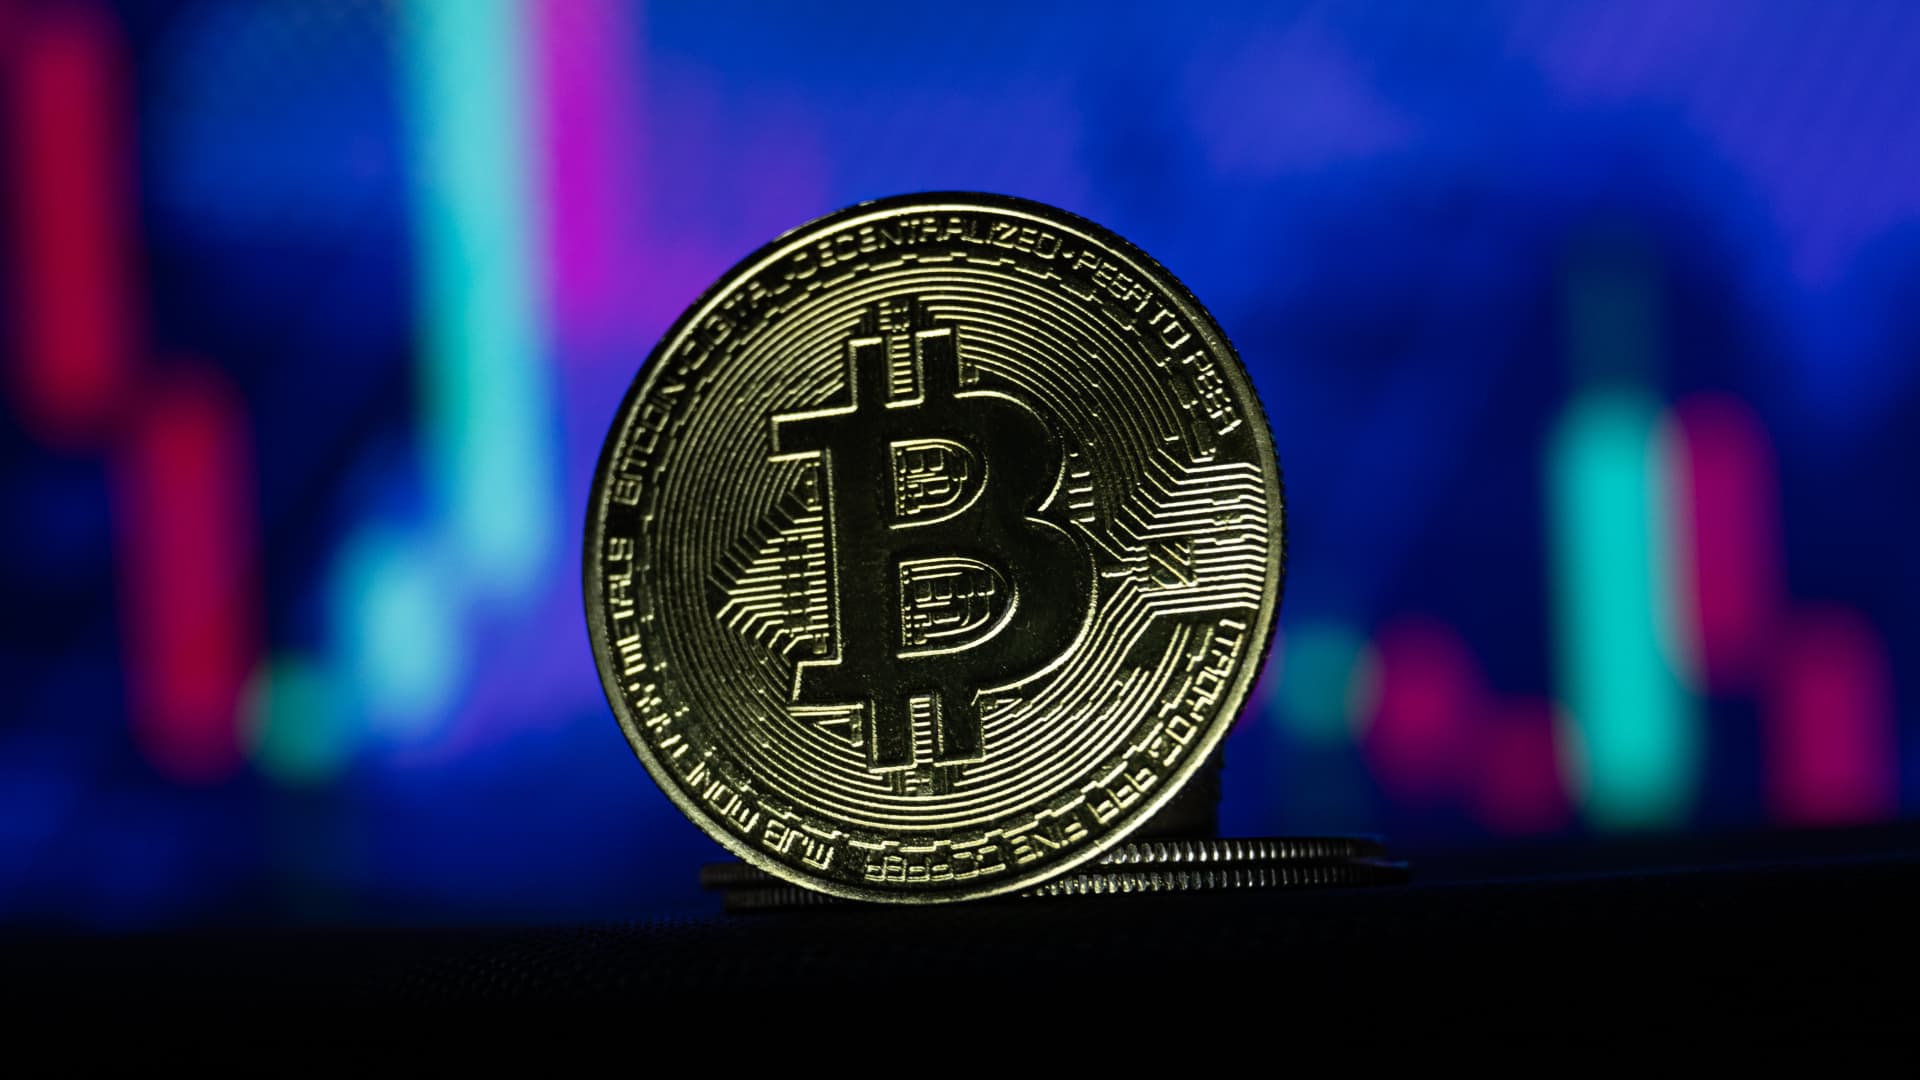 Bitcoin losses accelerate after ETF launch, ether heads for 18% gain